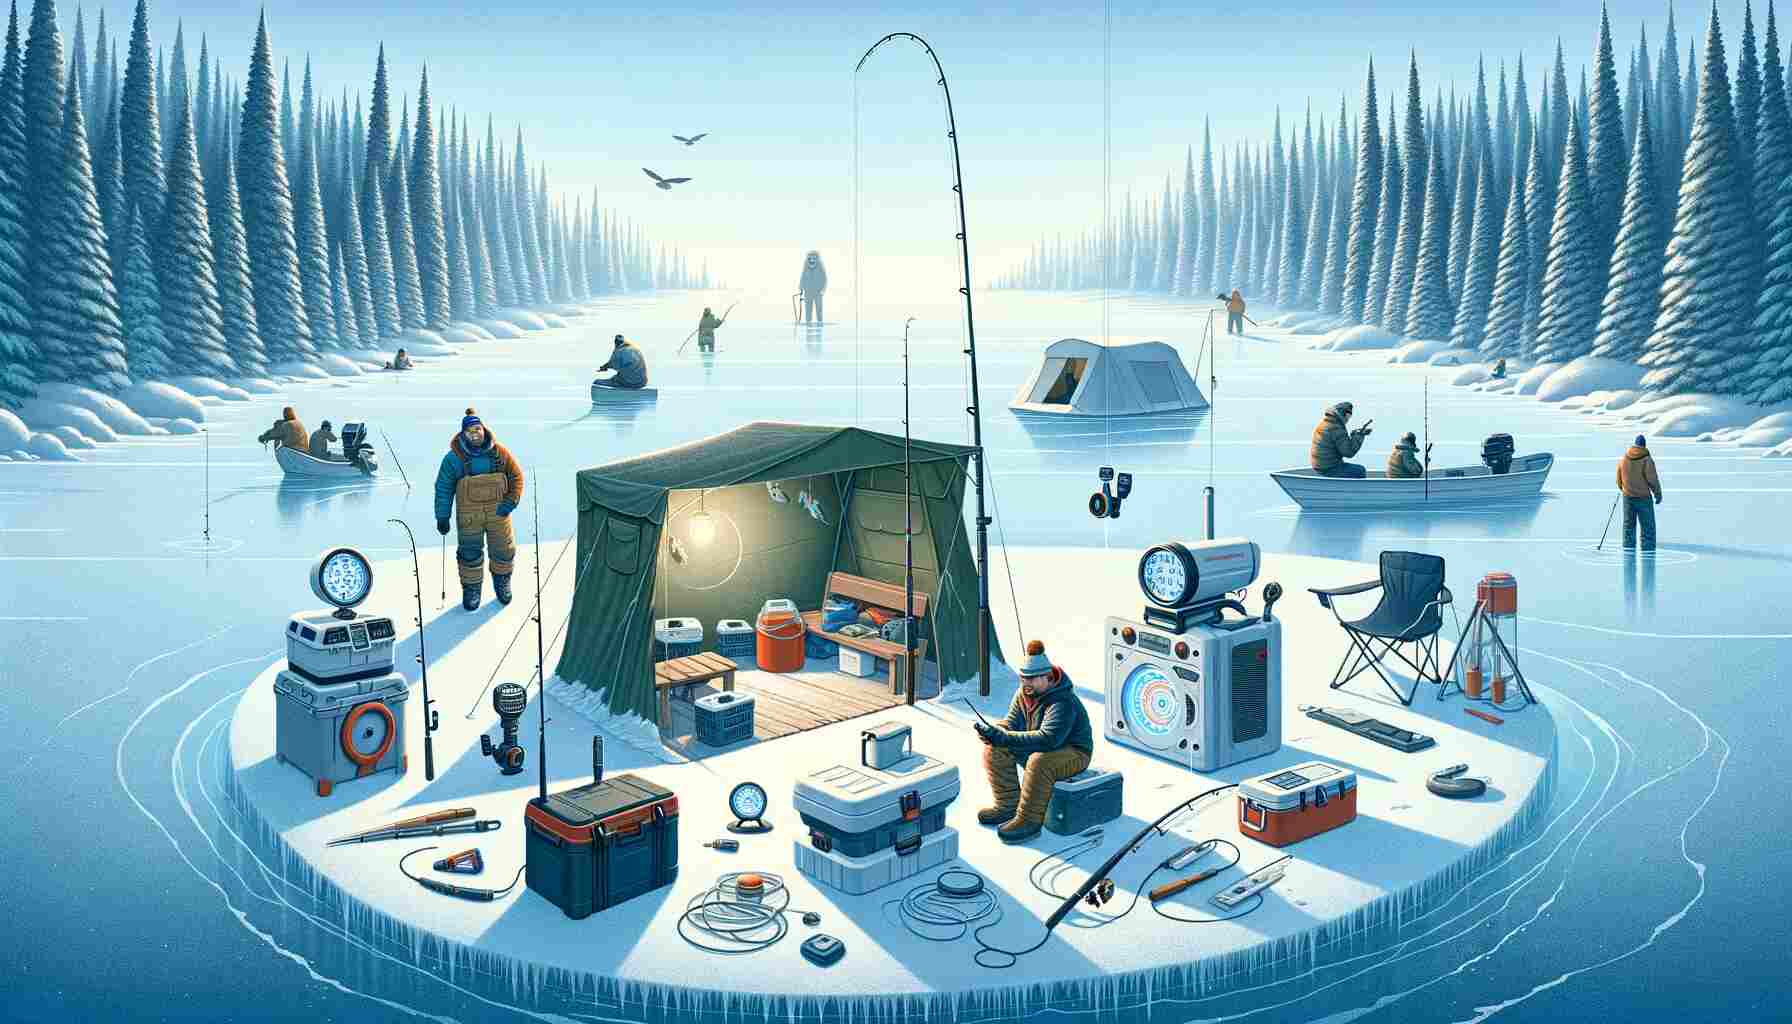 Here is the featured image for “The Rise of Ice Fishing: Innovations Transforming the Chilly Adventure.” It showcases a winter landscape with ice fishers using modern equipment, capturing the essence of innovation in ice fishing.